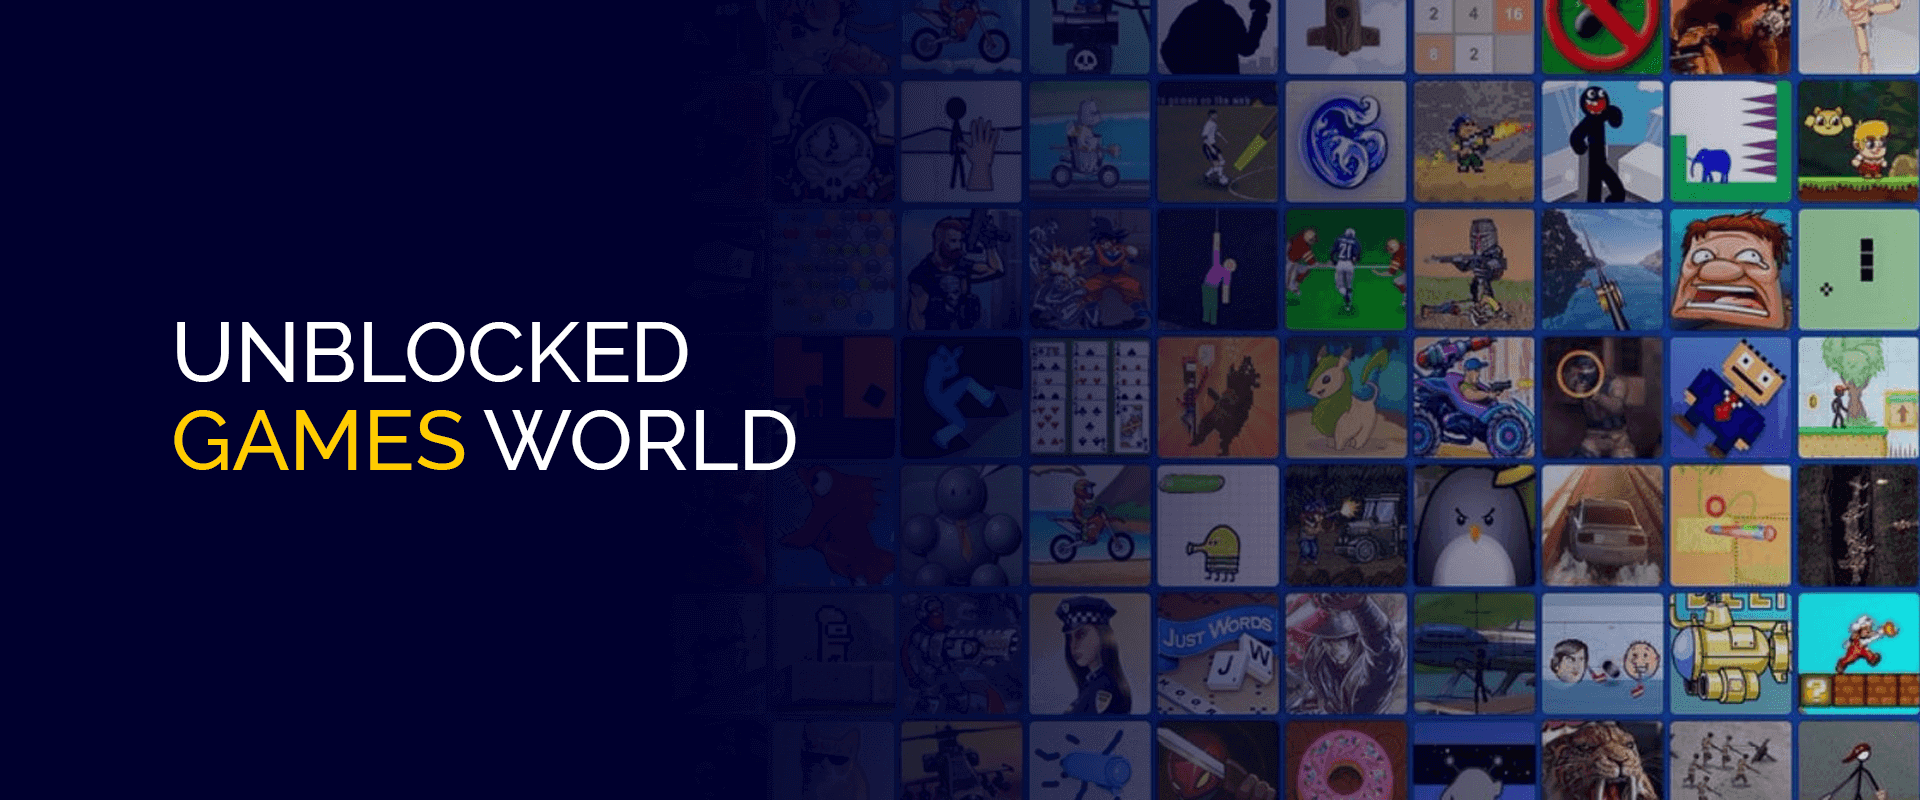 Unblocked Games World: An Incredible Way to Experience